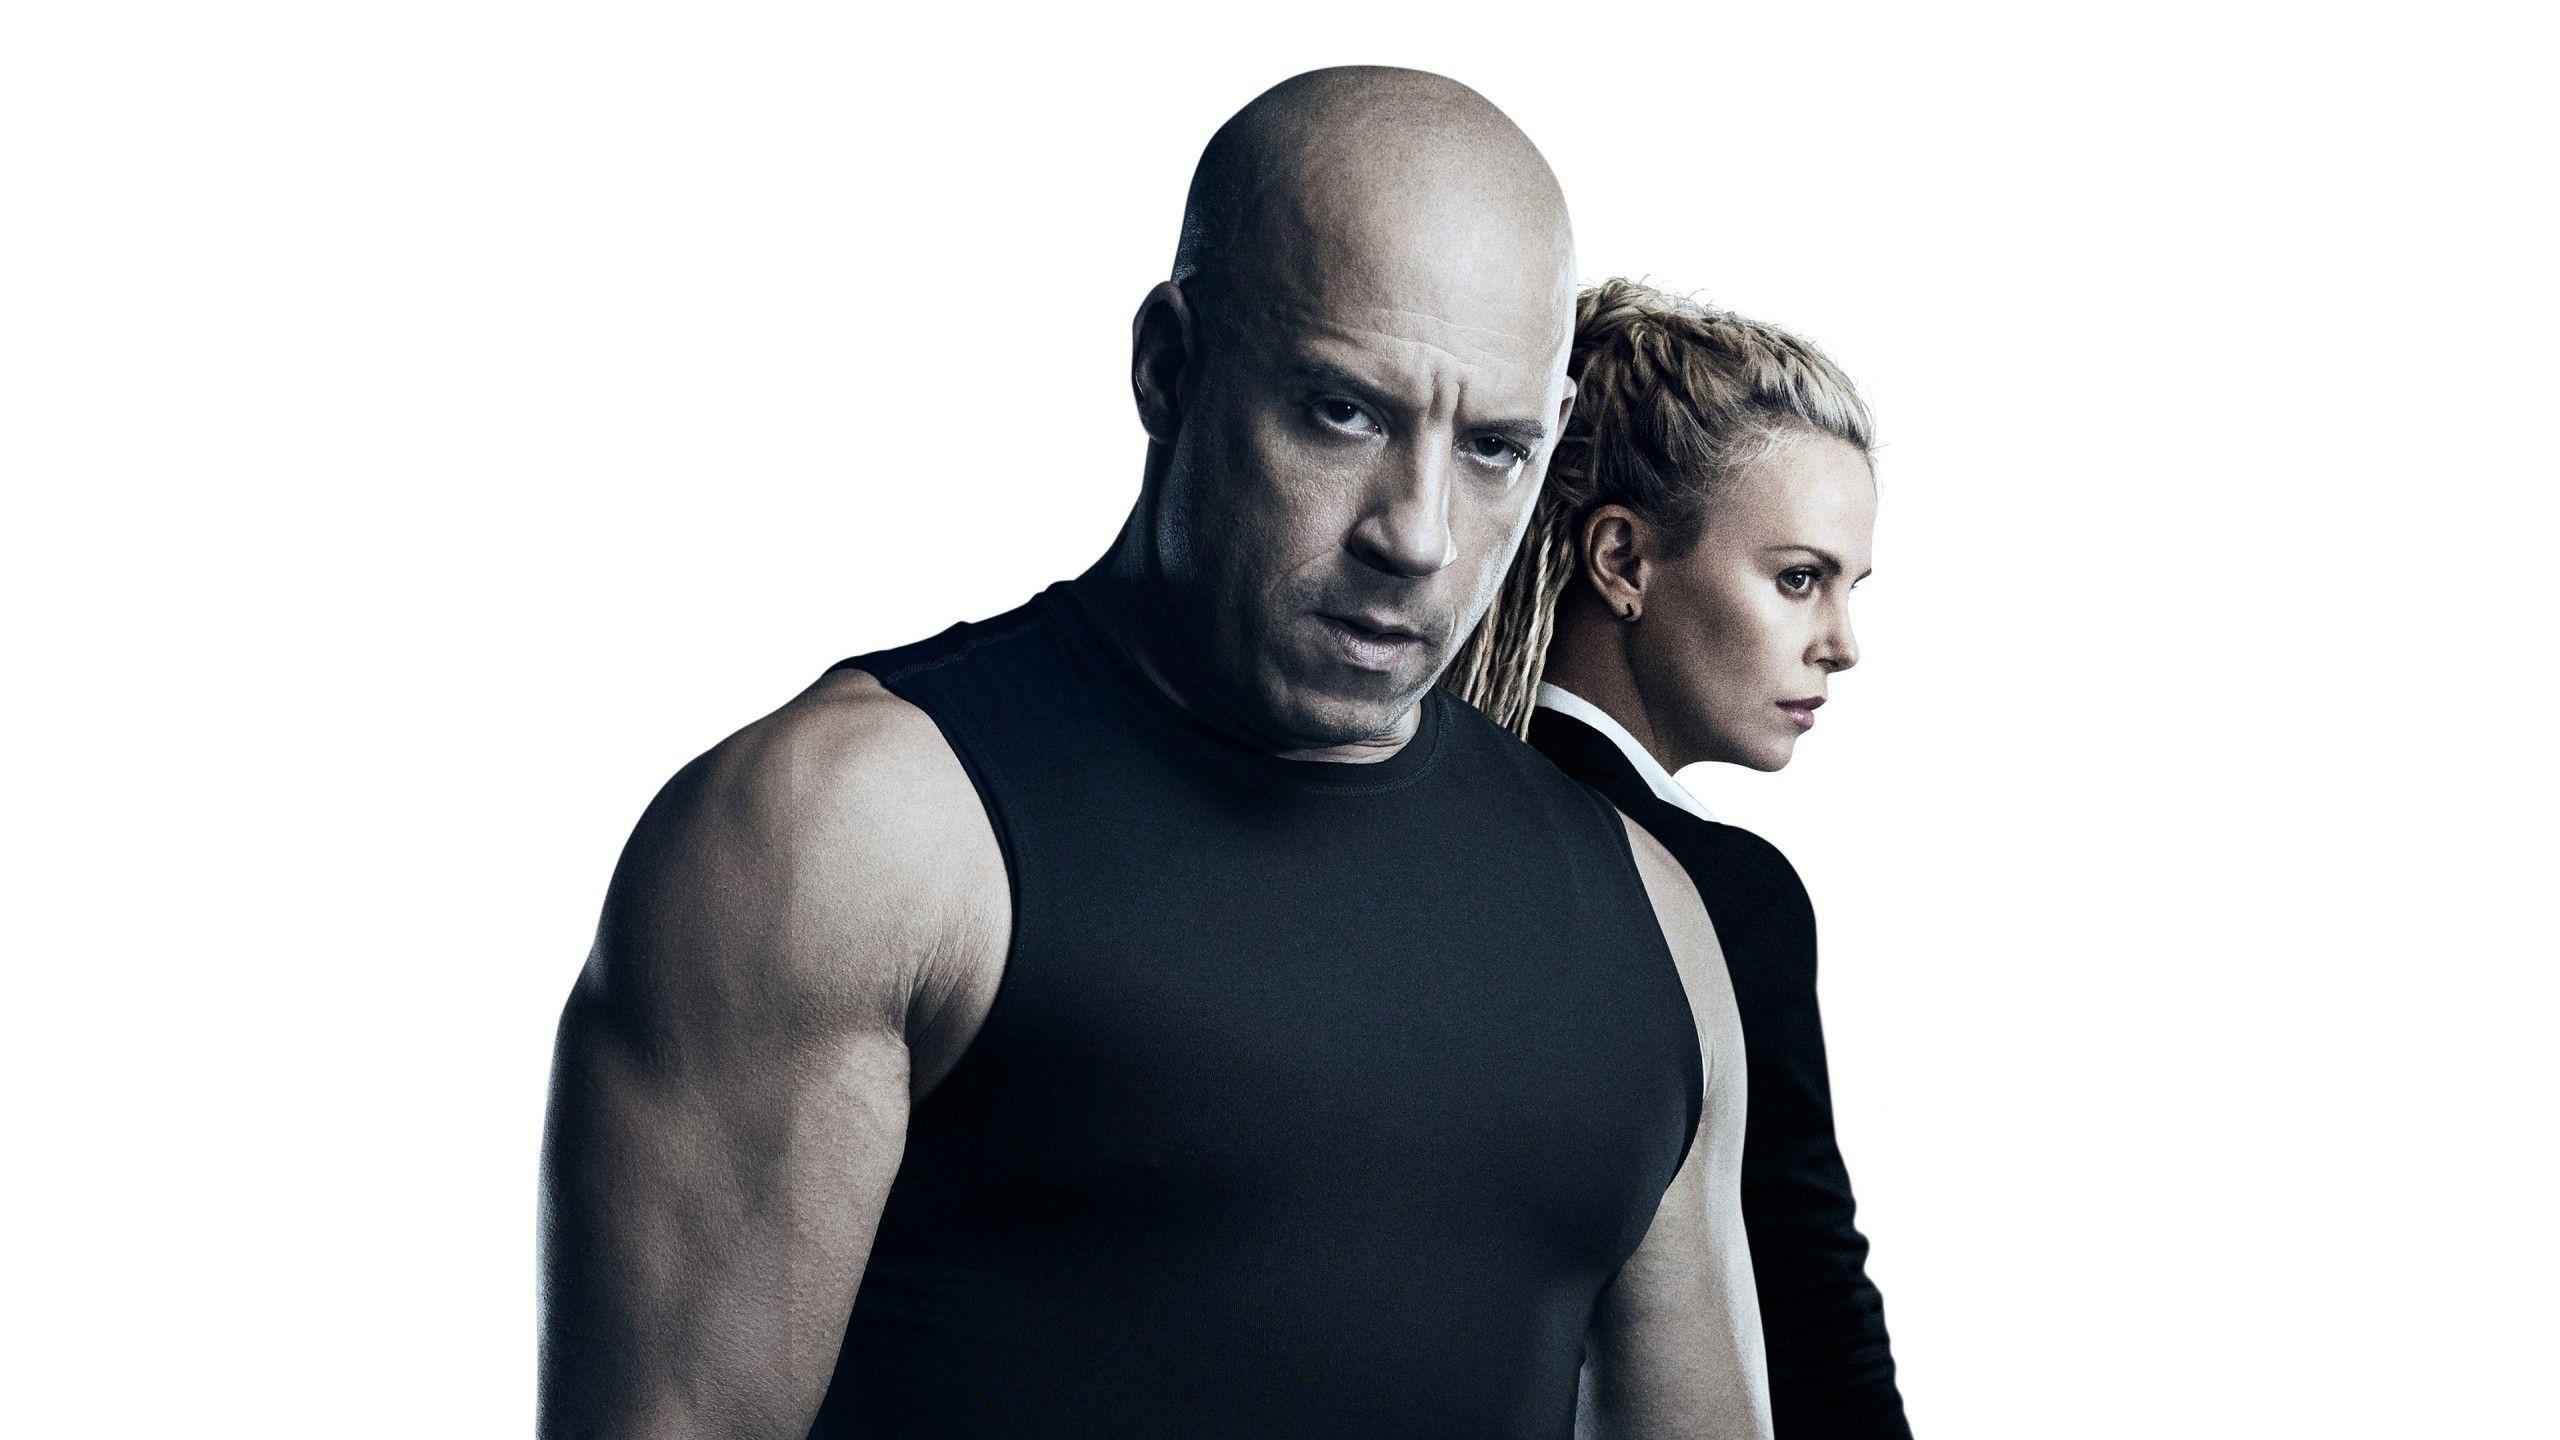 Wallpaper The Fate of the Furious, Vin Diesel, Charlize Theron, 4K